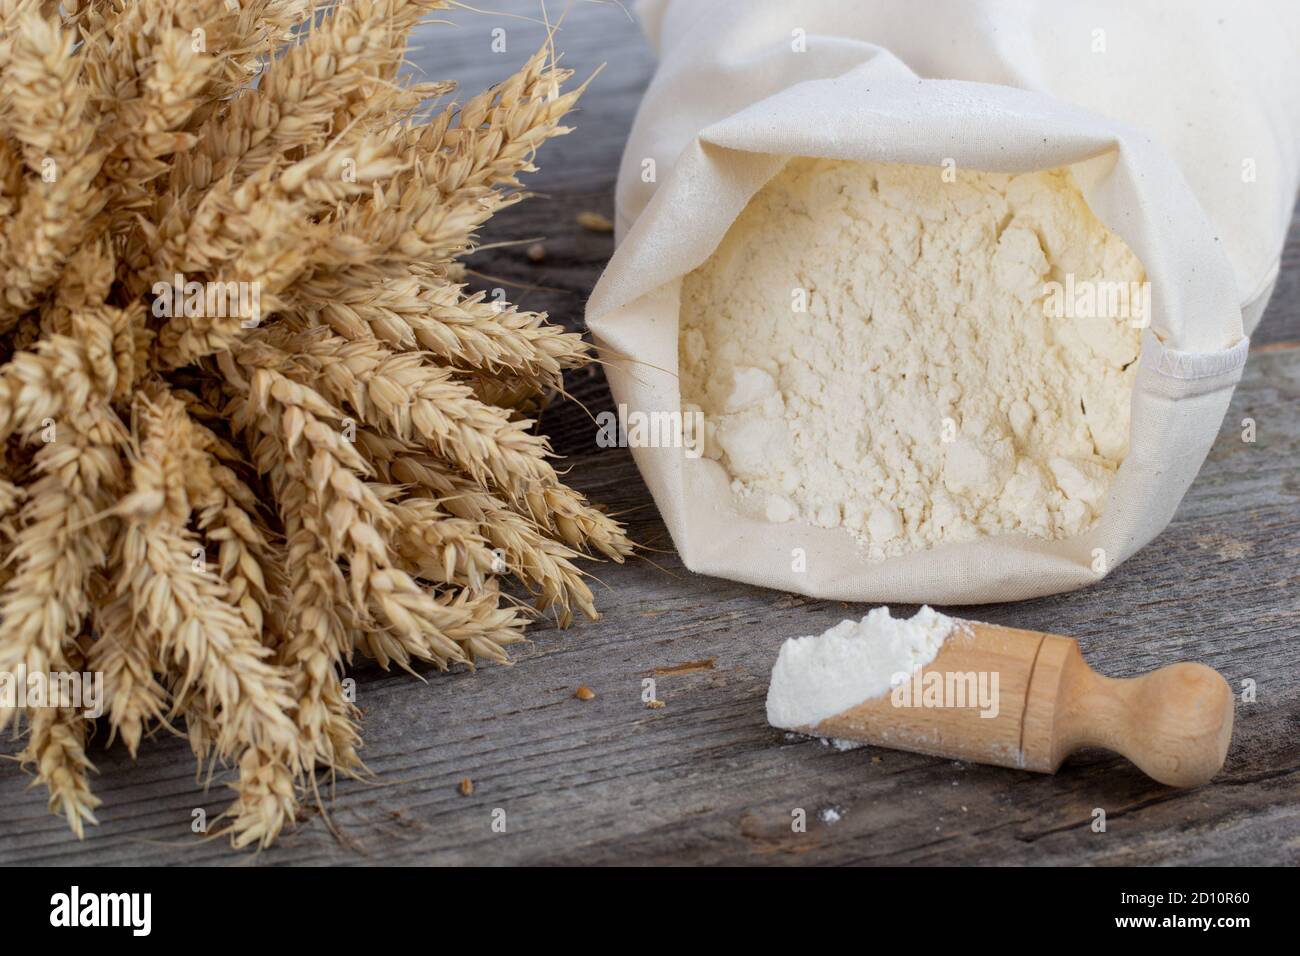 Flour sack, ears and wooden measuring cup on wooden background. Natural baking products. Stock Photo